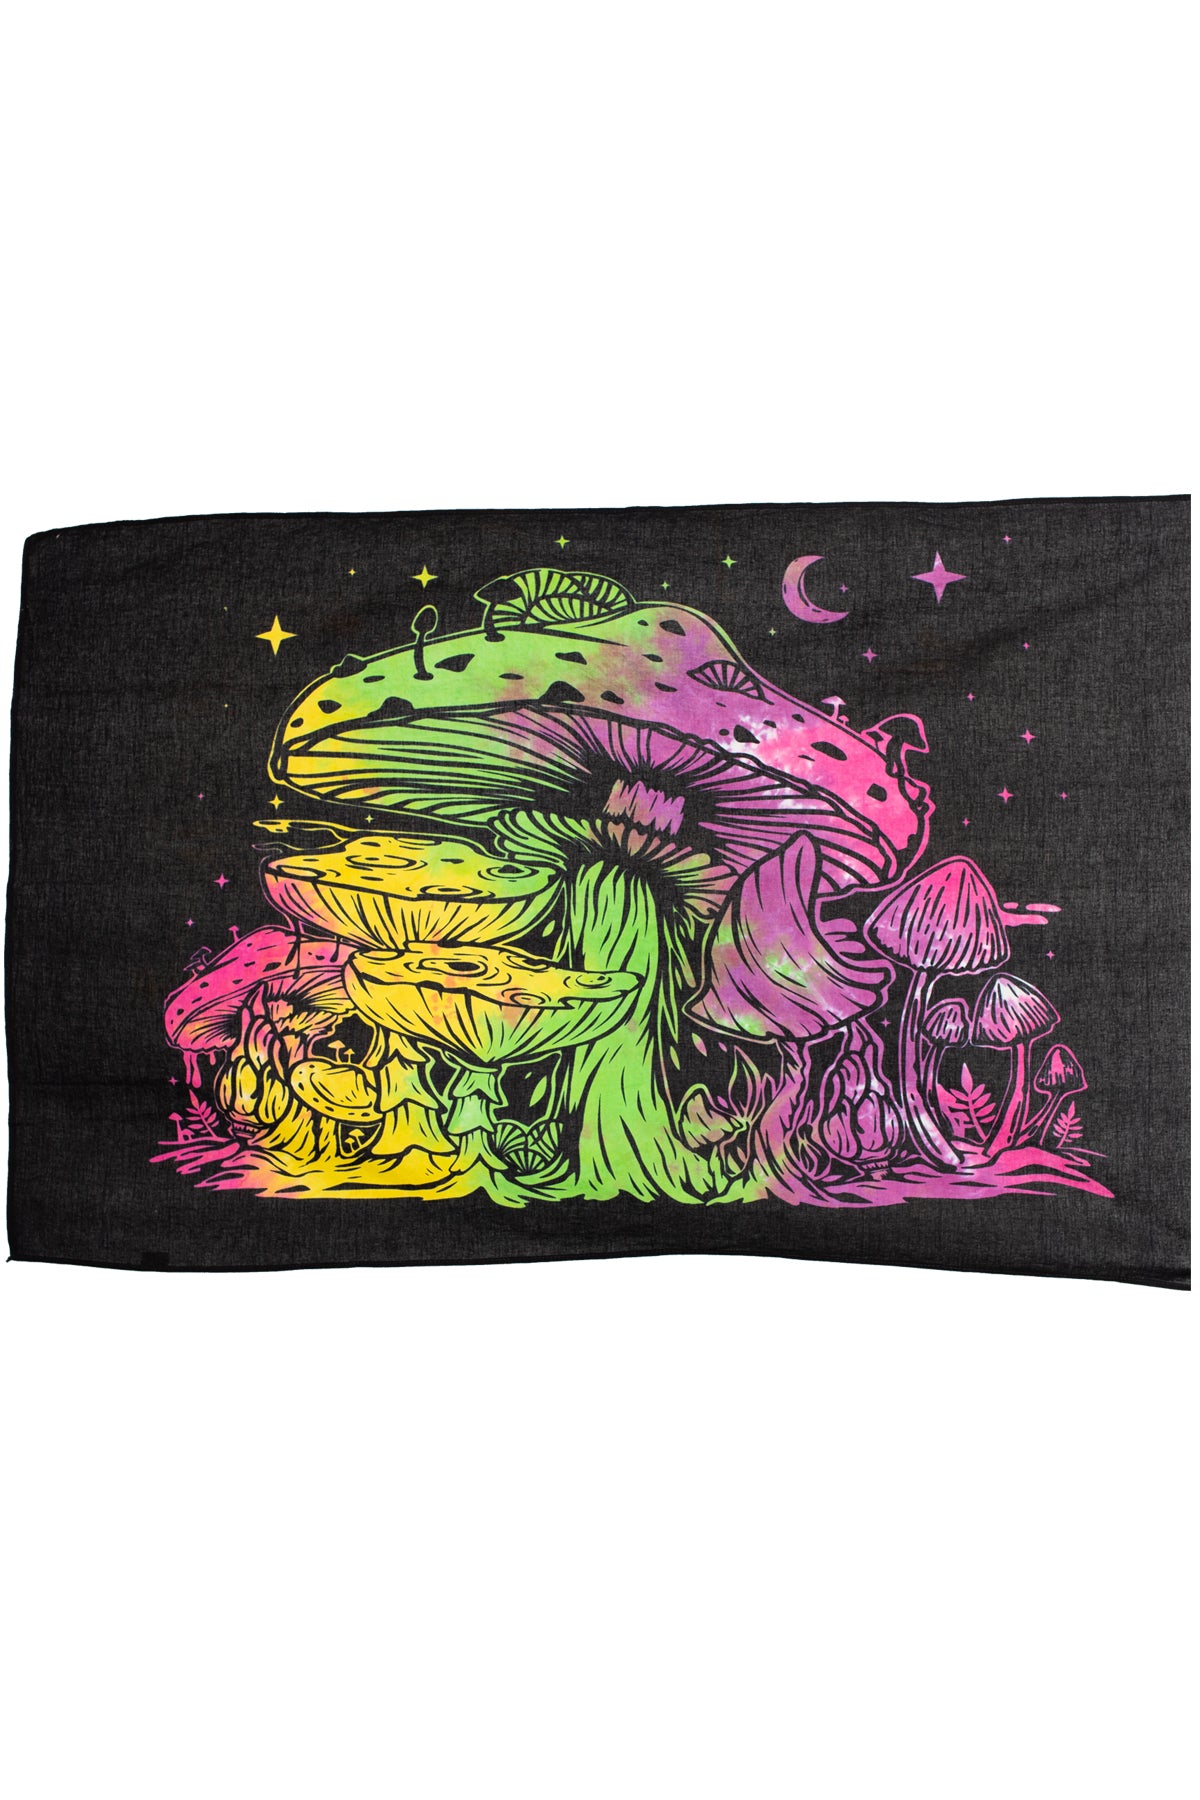 Psychedelic Tie-Dye Mushroom Small Tapestry